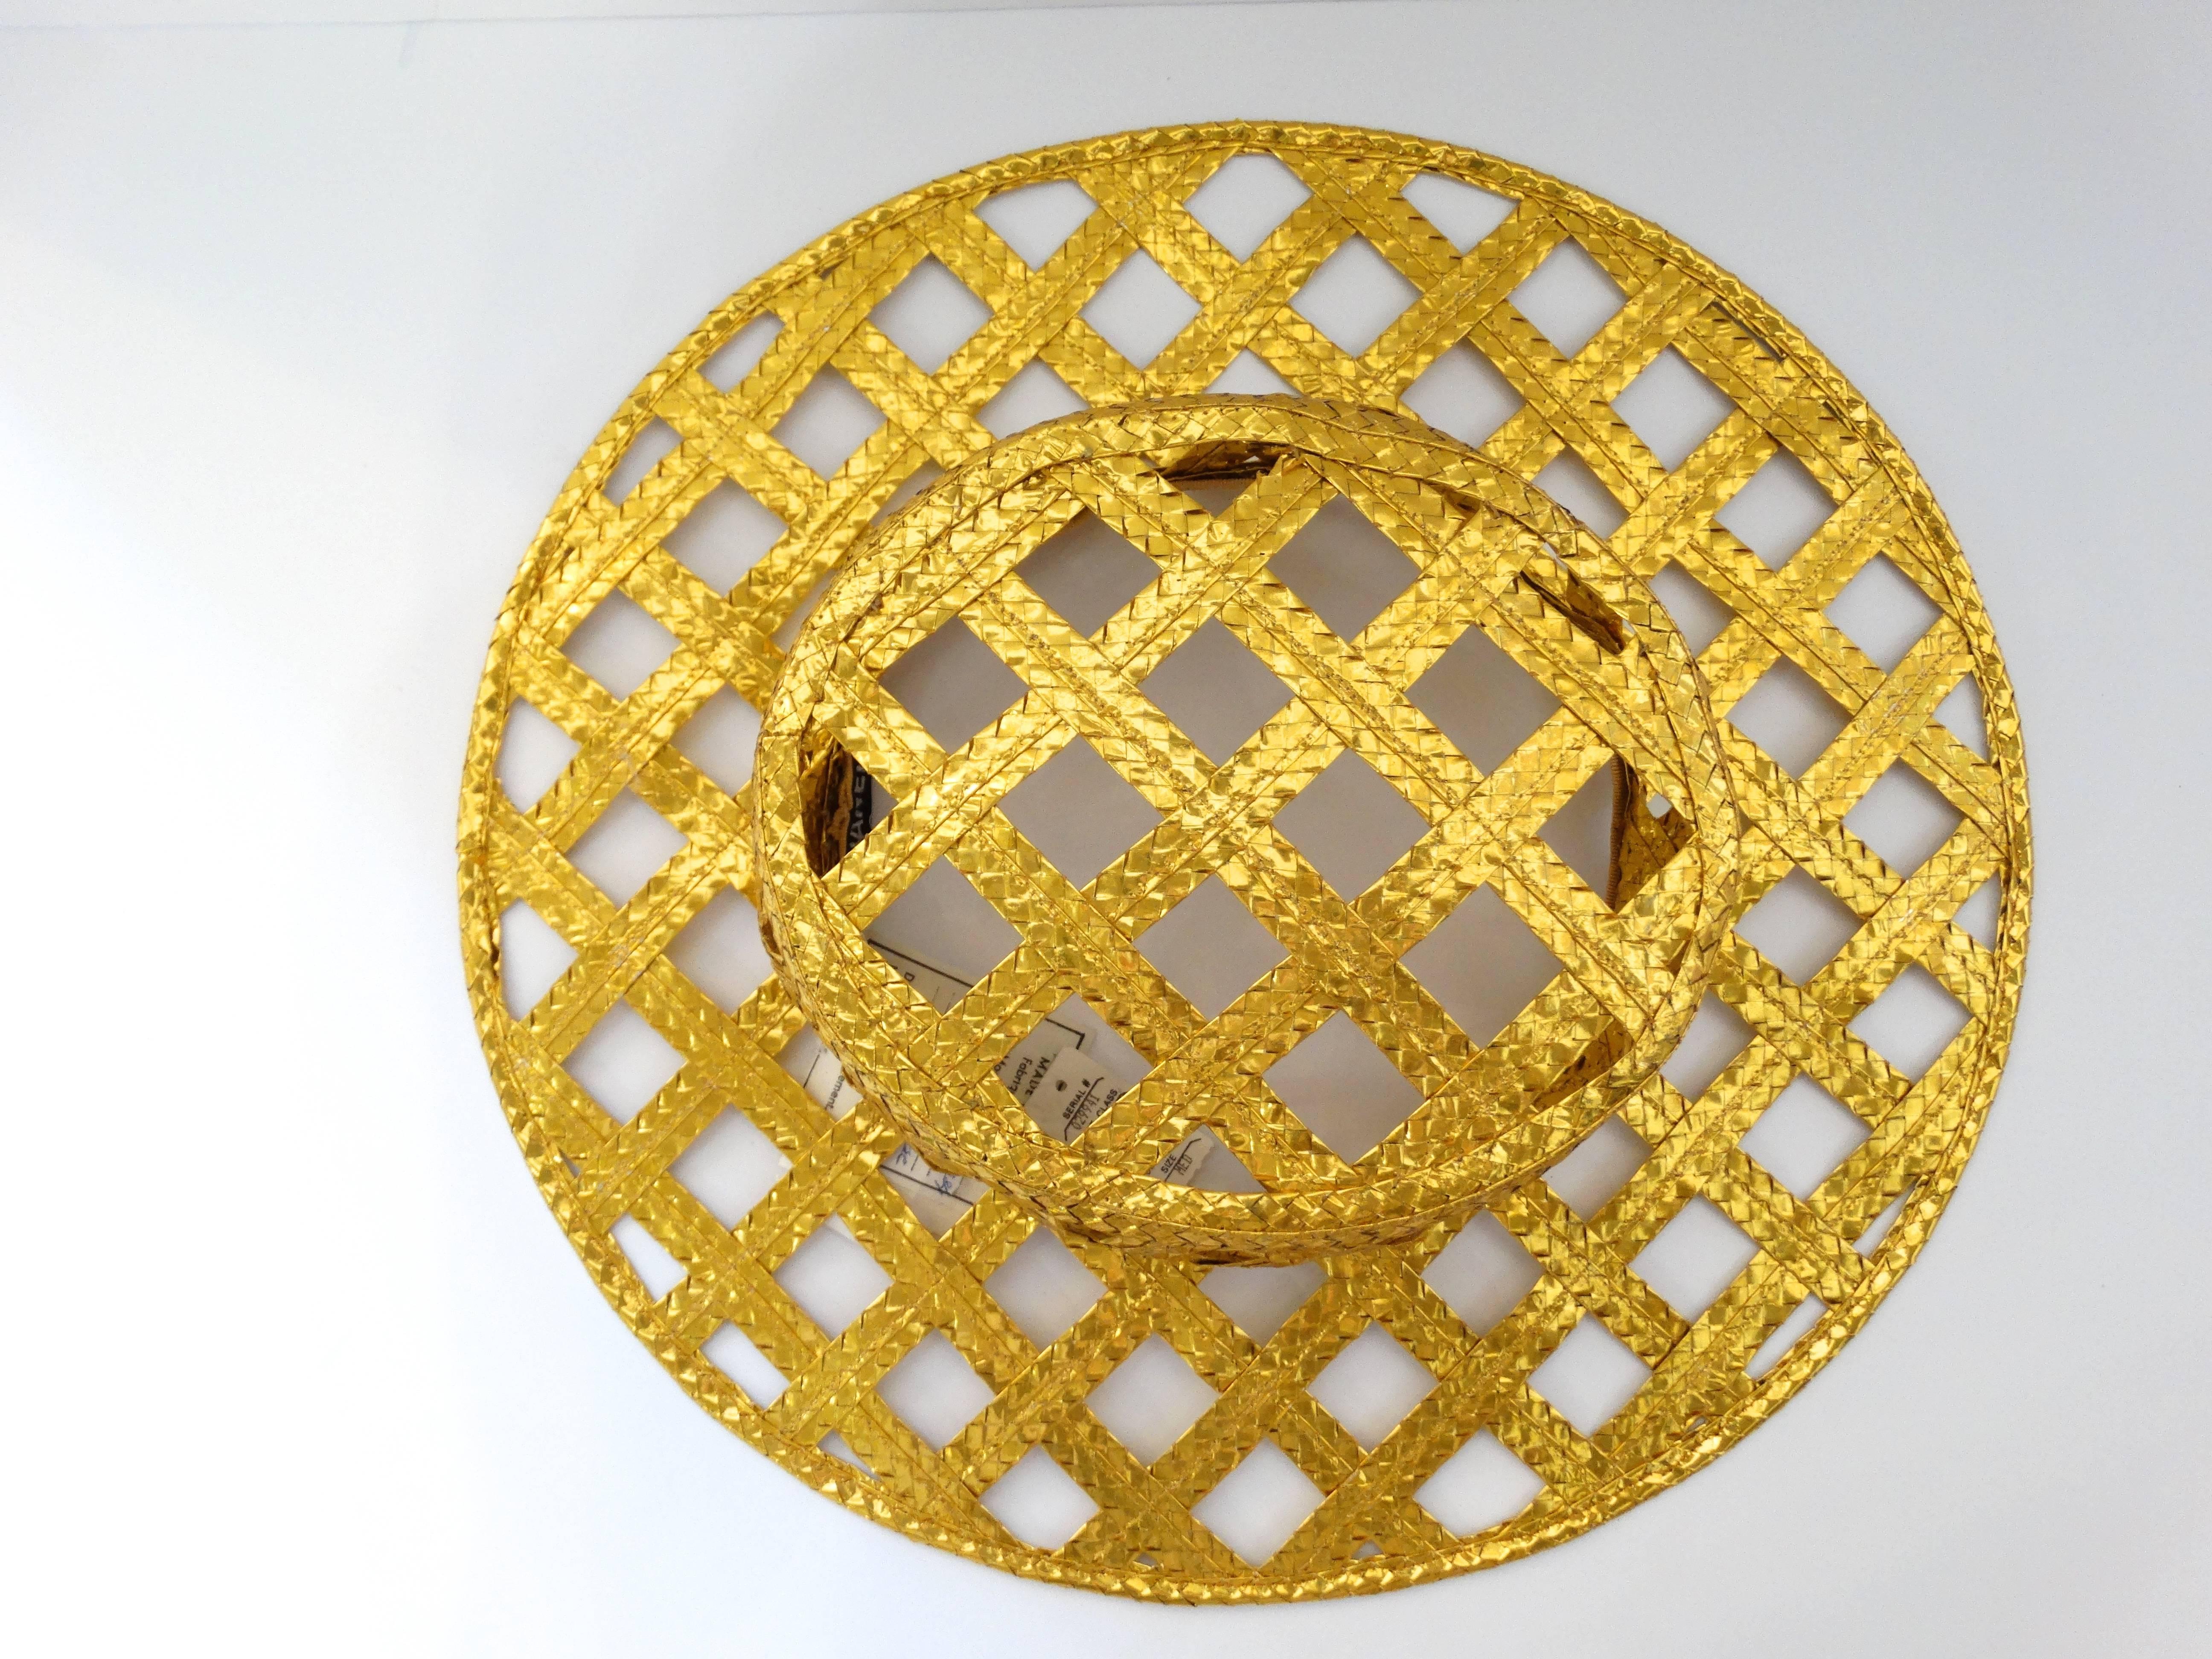 
Fabulous Chanel gold lattice hat with tags attached. This hat is gold woven and ultra shiny with a foil like effect. From Spring of 1990 this hat was originally purchased from the West Palm Beach Chanel Boutique over 27 years ago. Such a statement